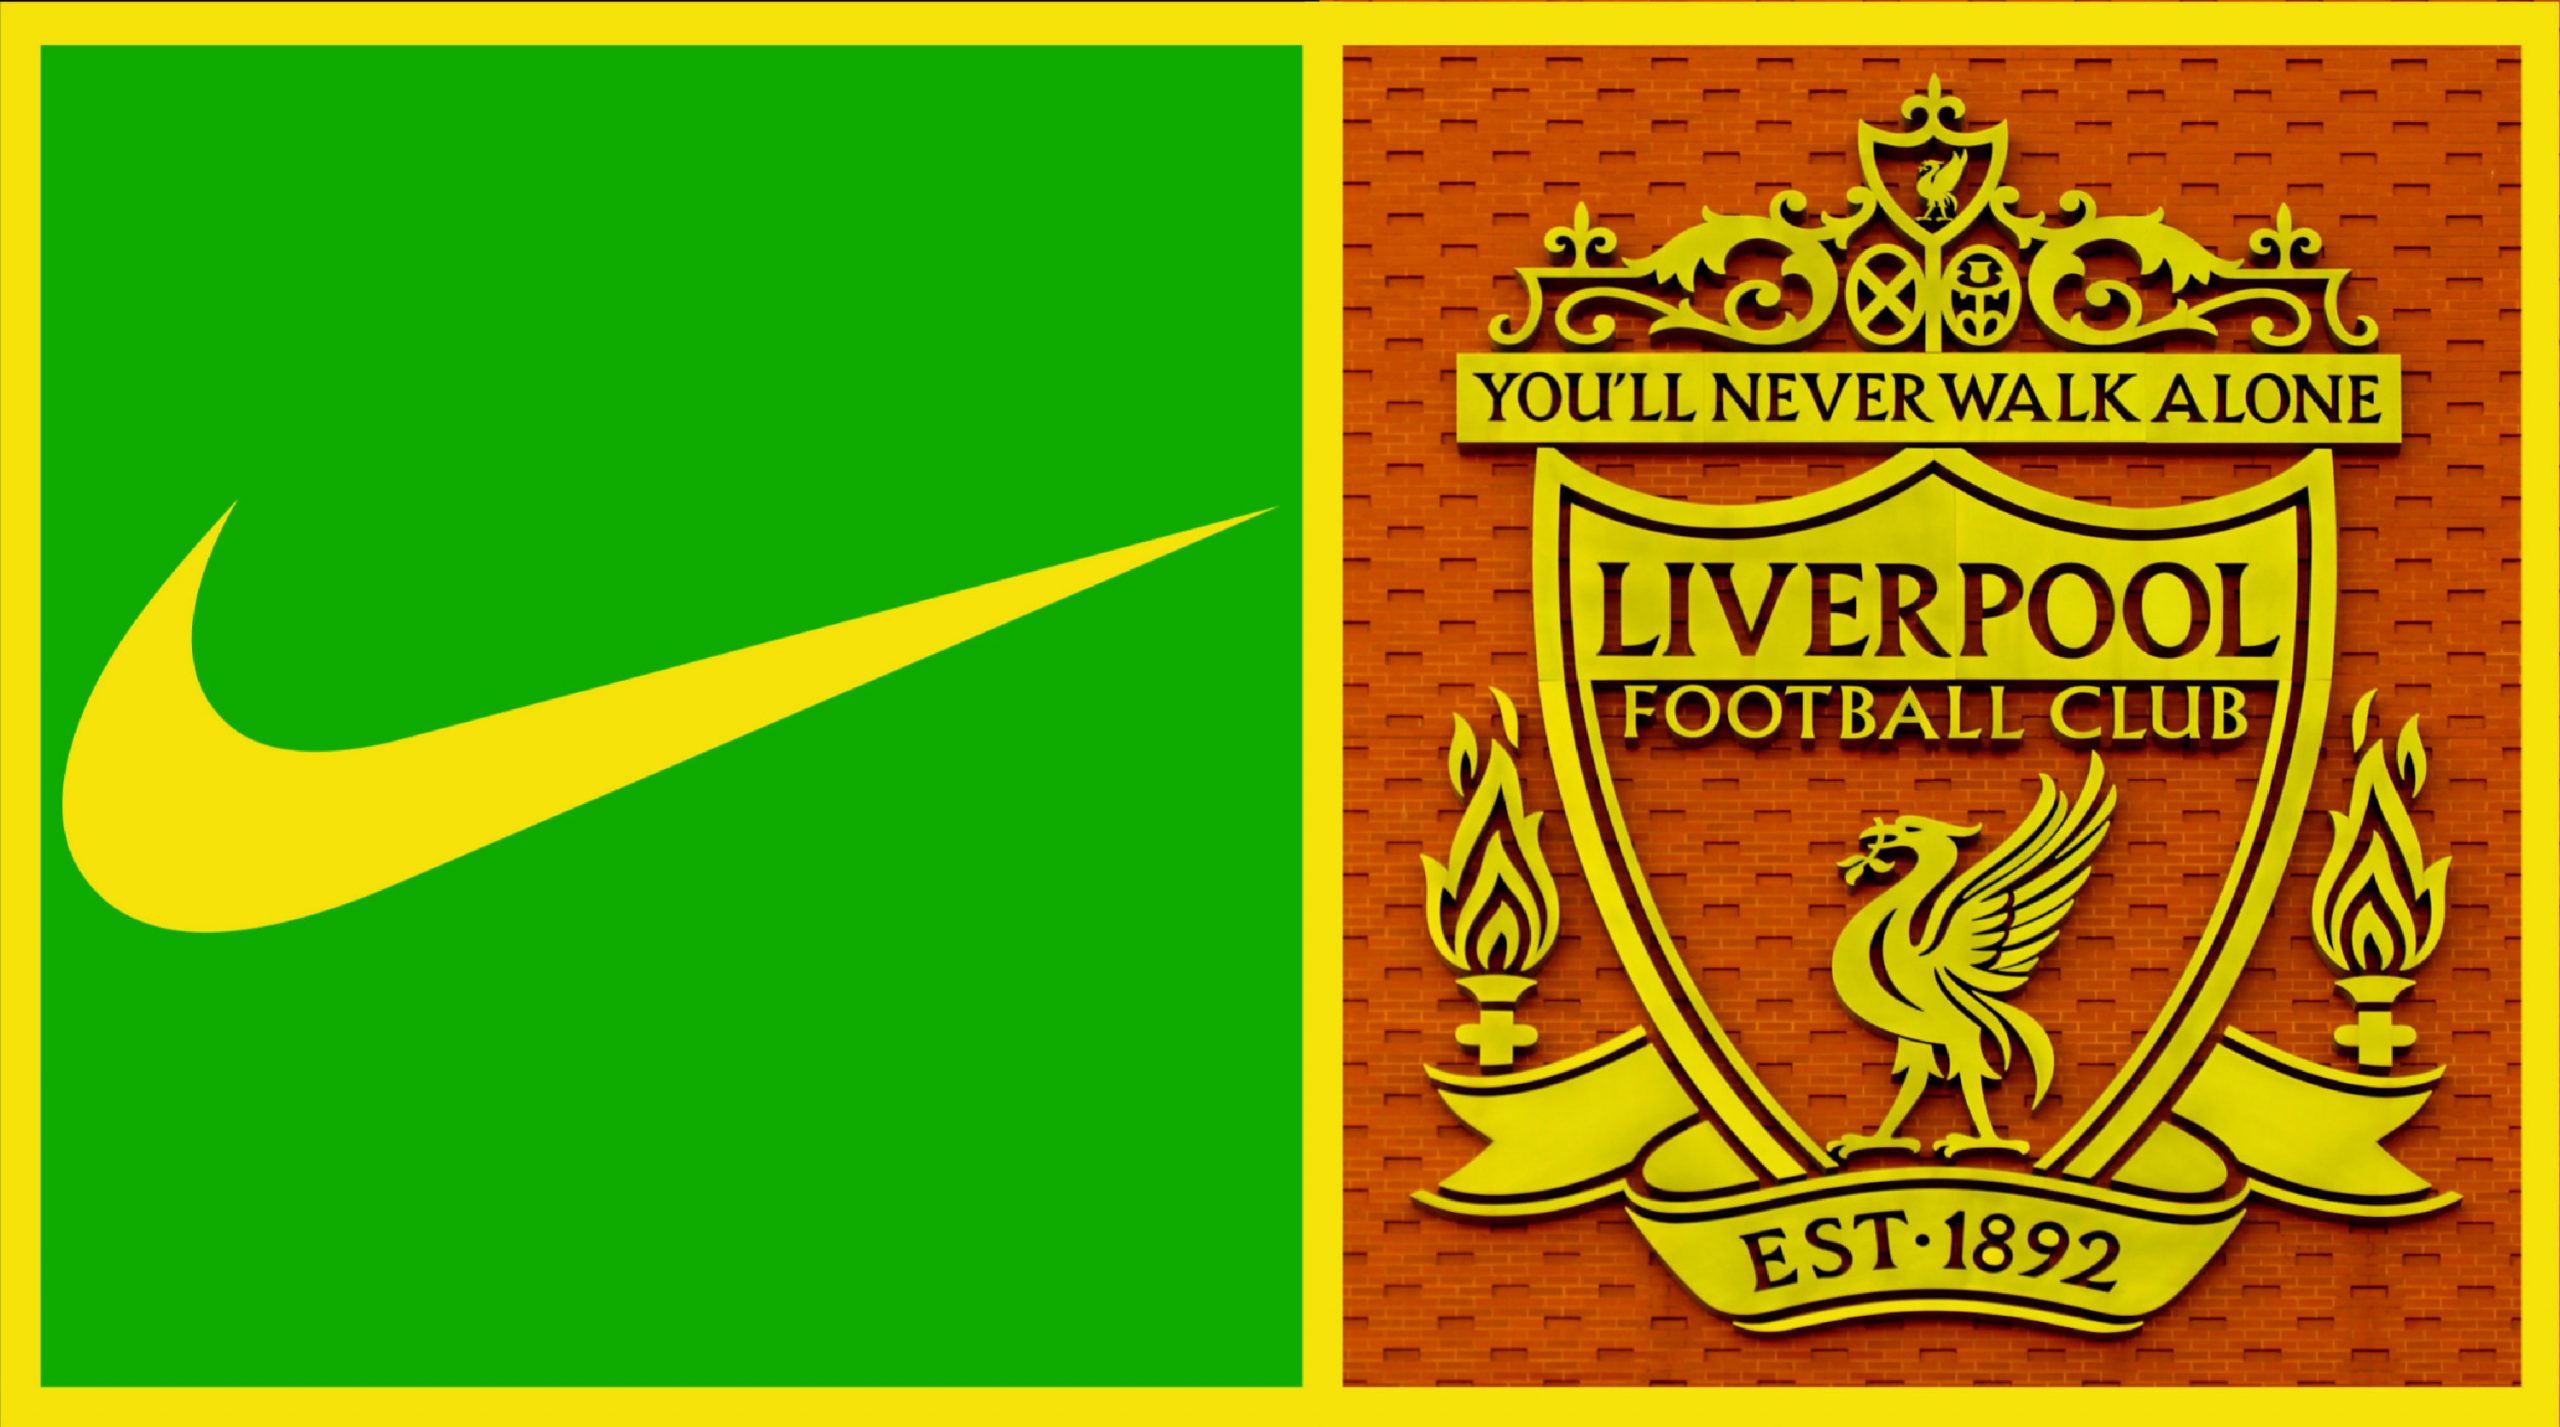 Leaked: Possible Liverpool away kit for 21/22 season is as old school as it gets